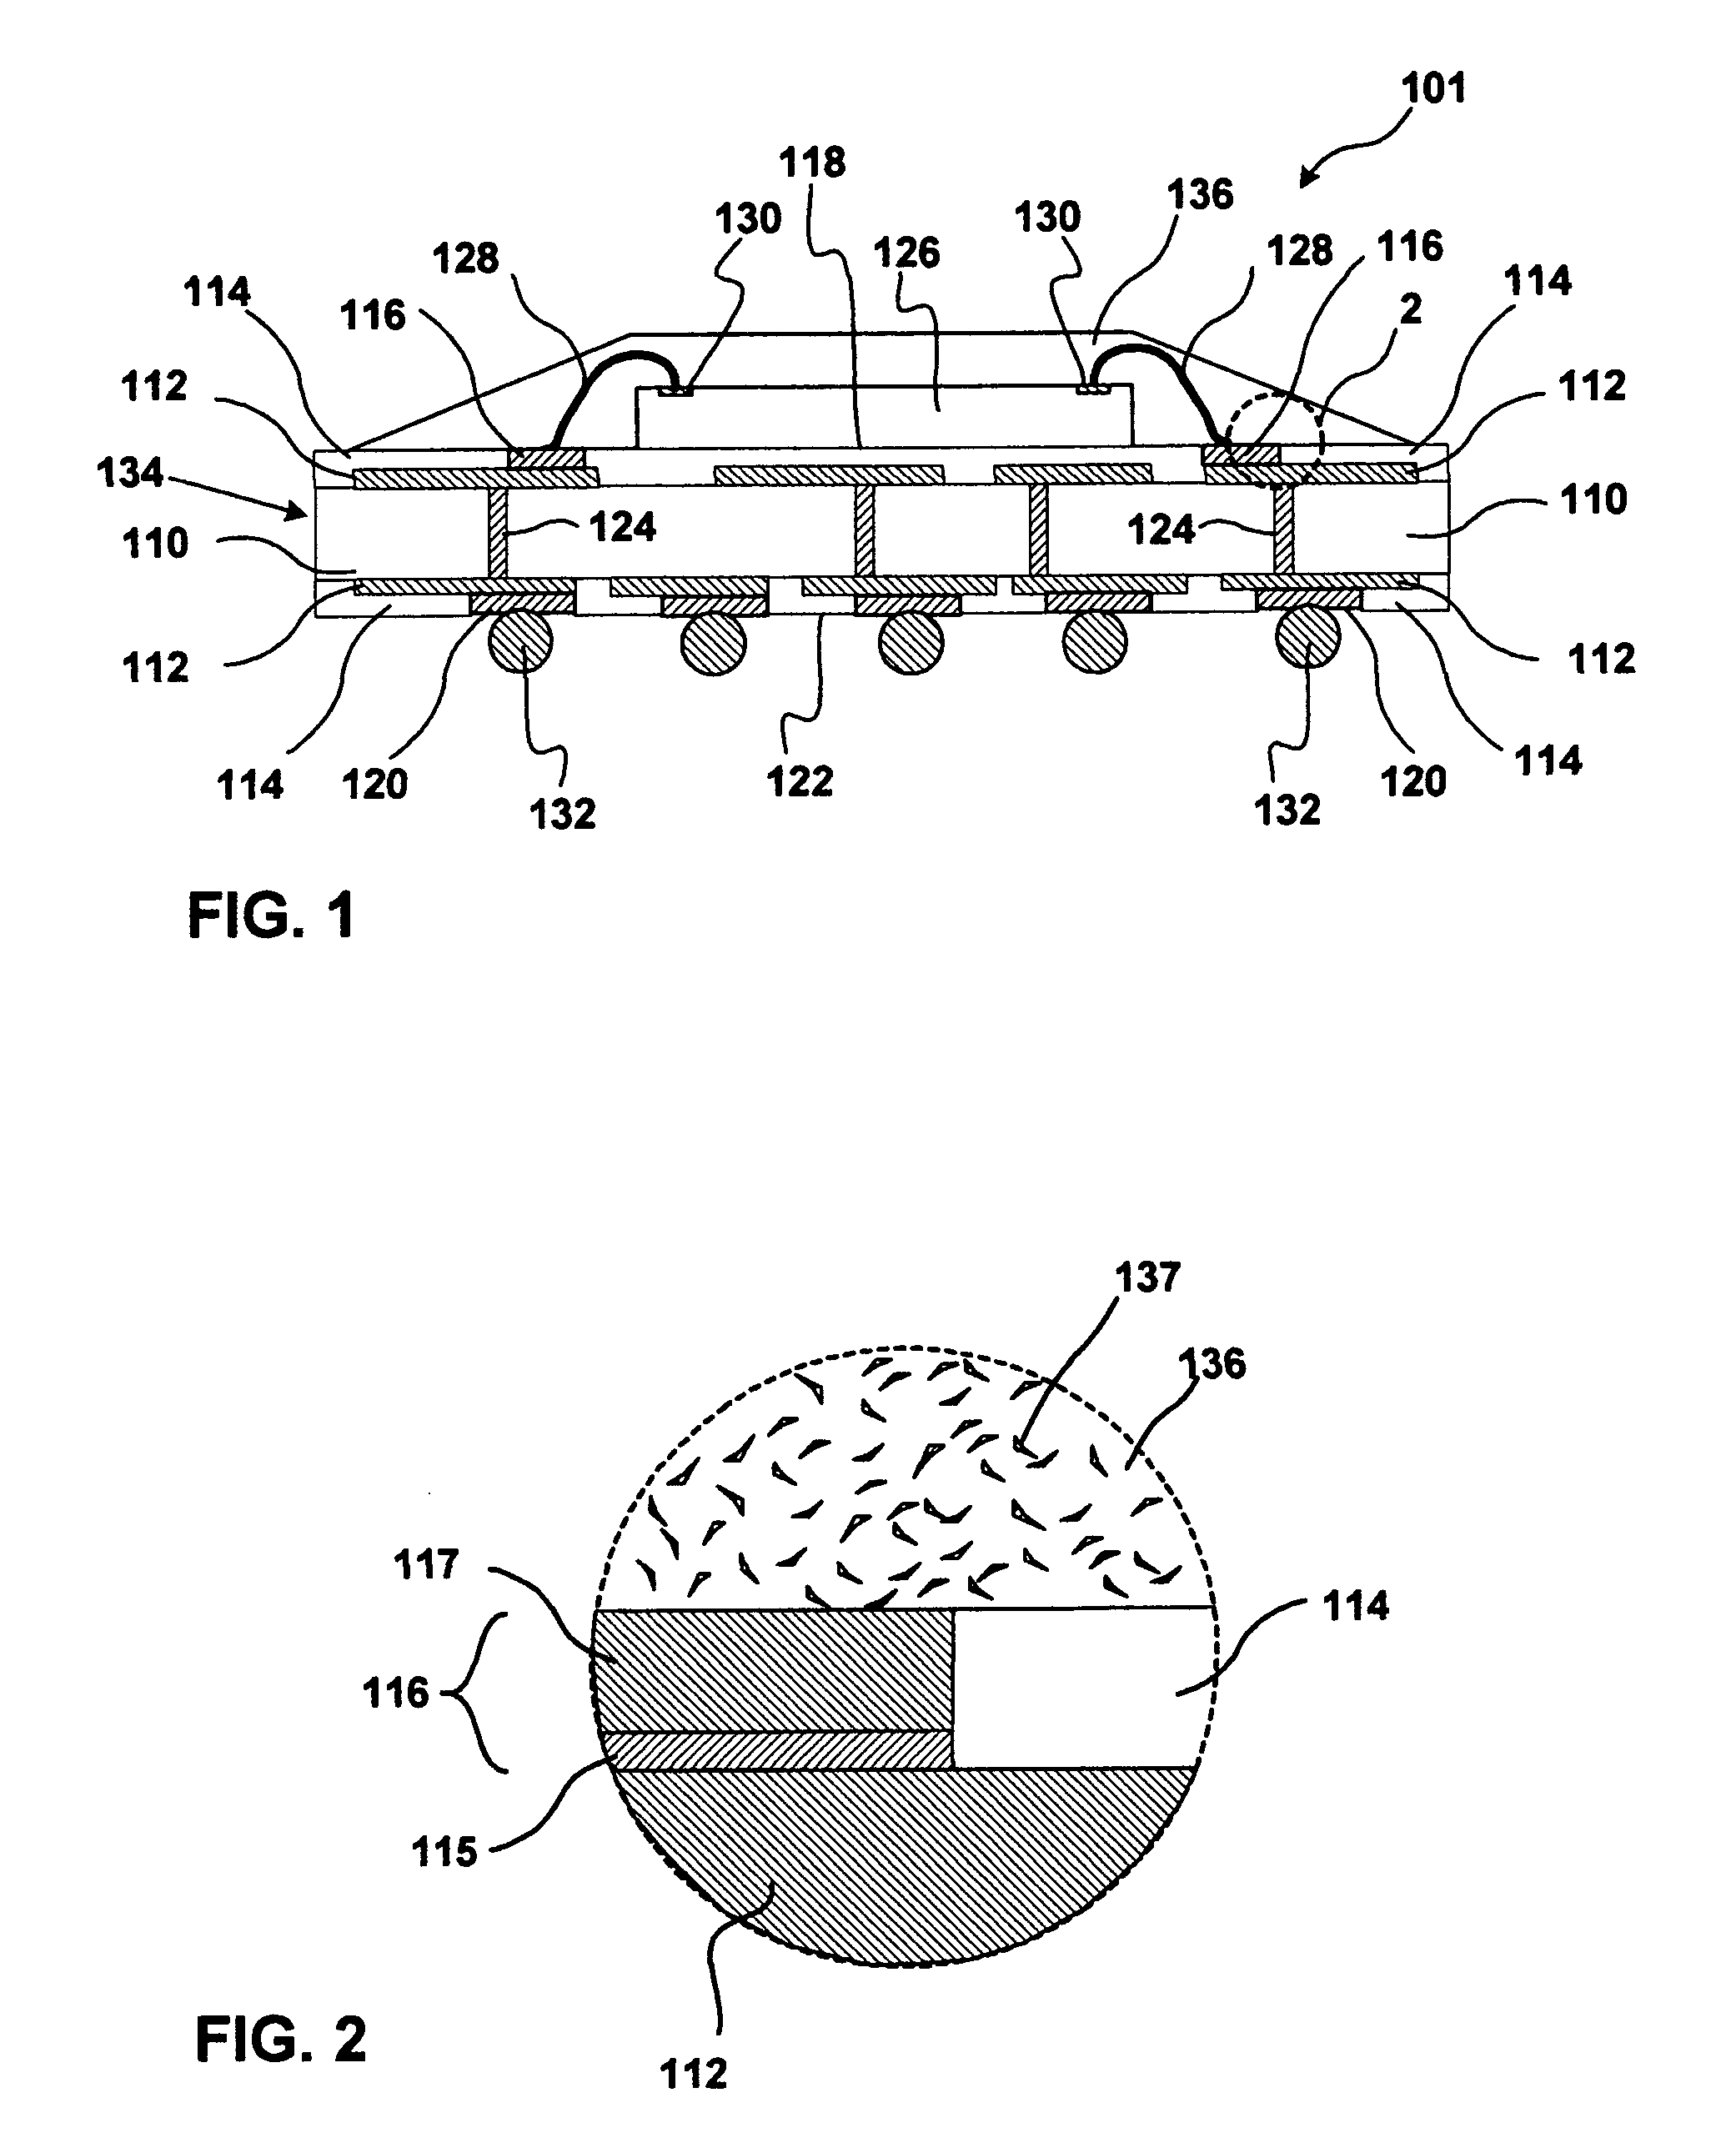 Use of gold surface finish on a copper wire-bond substrate, method of making same, and method of testing same